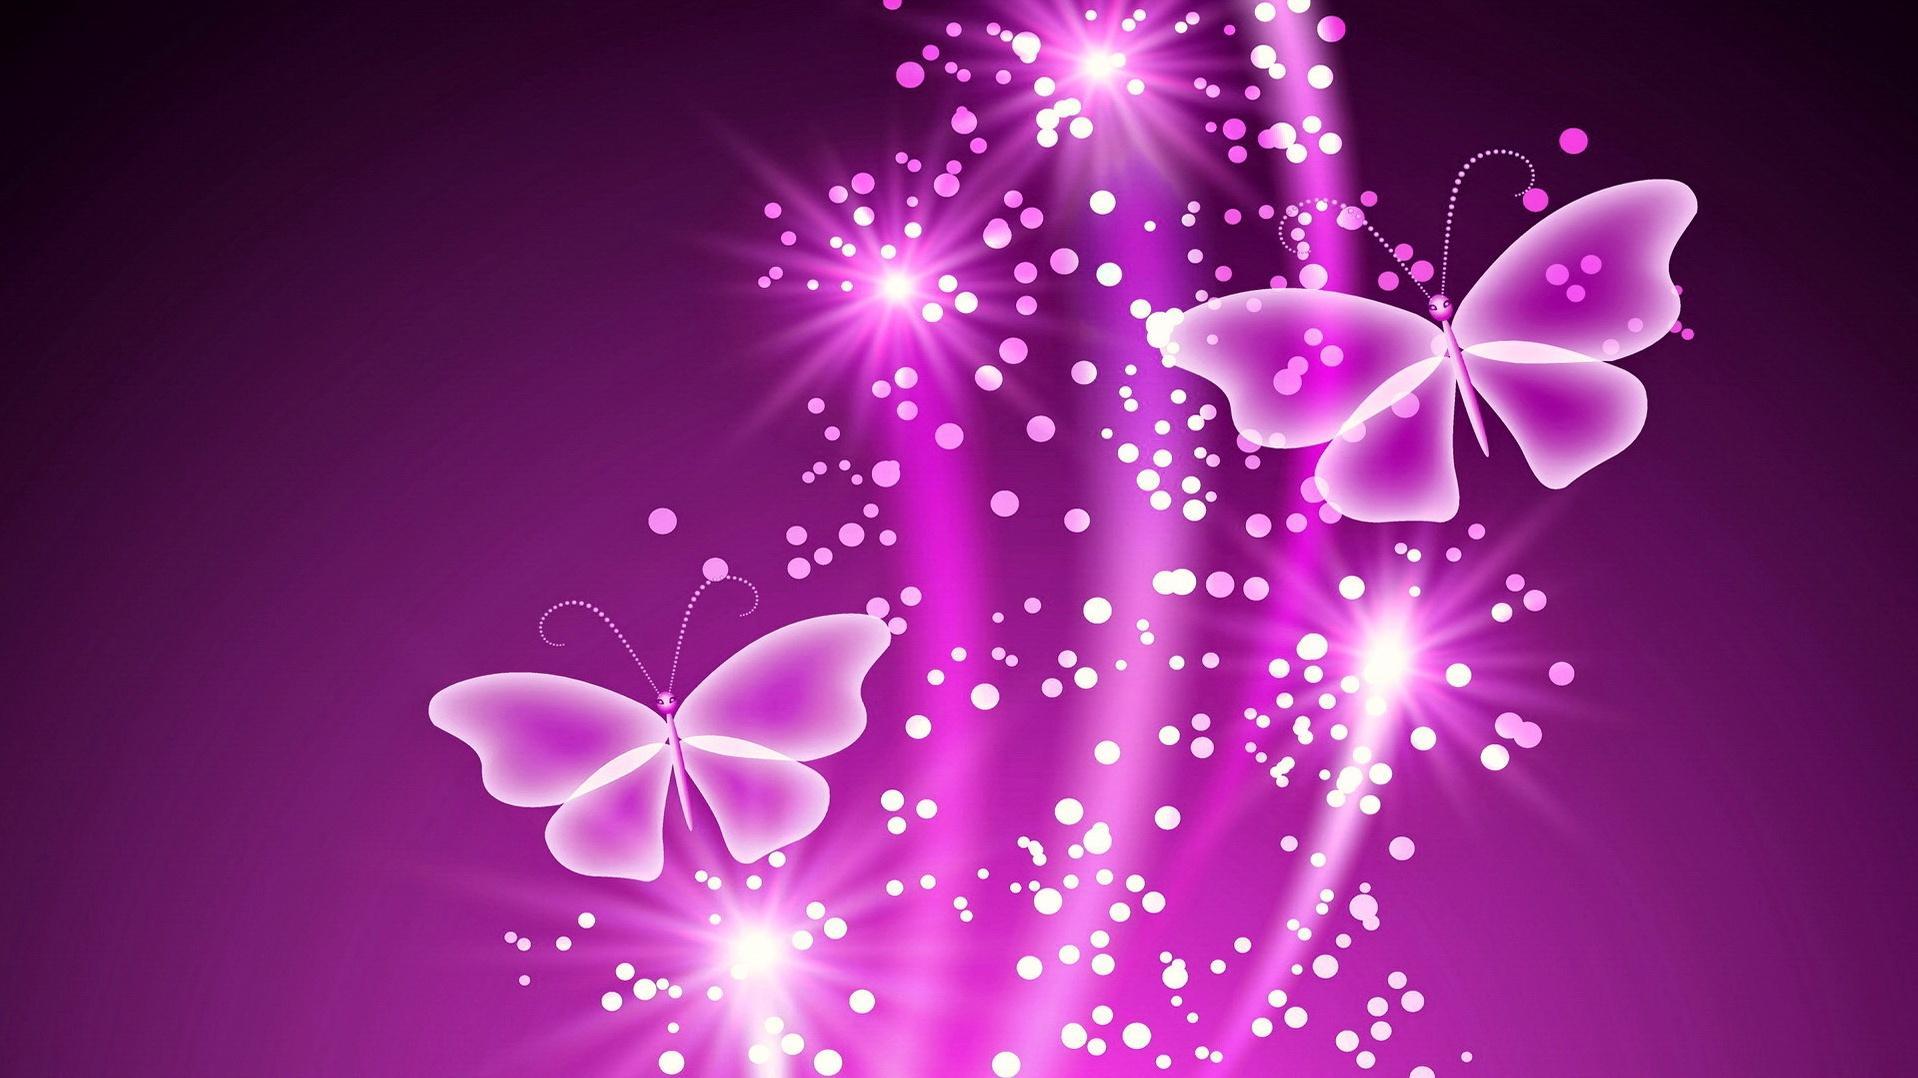 Neon Butterflies Live Wallpapers for Android